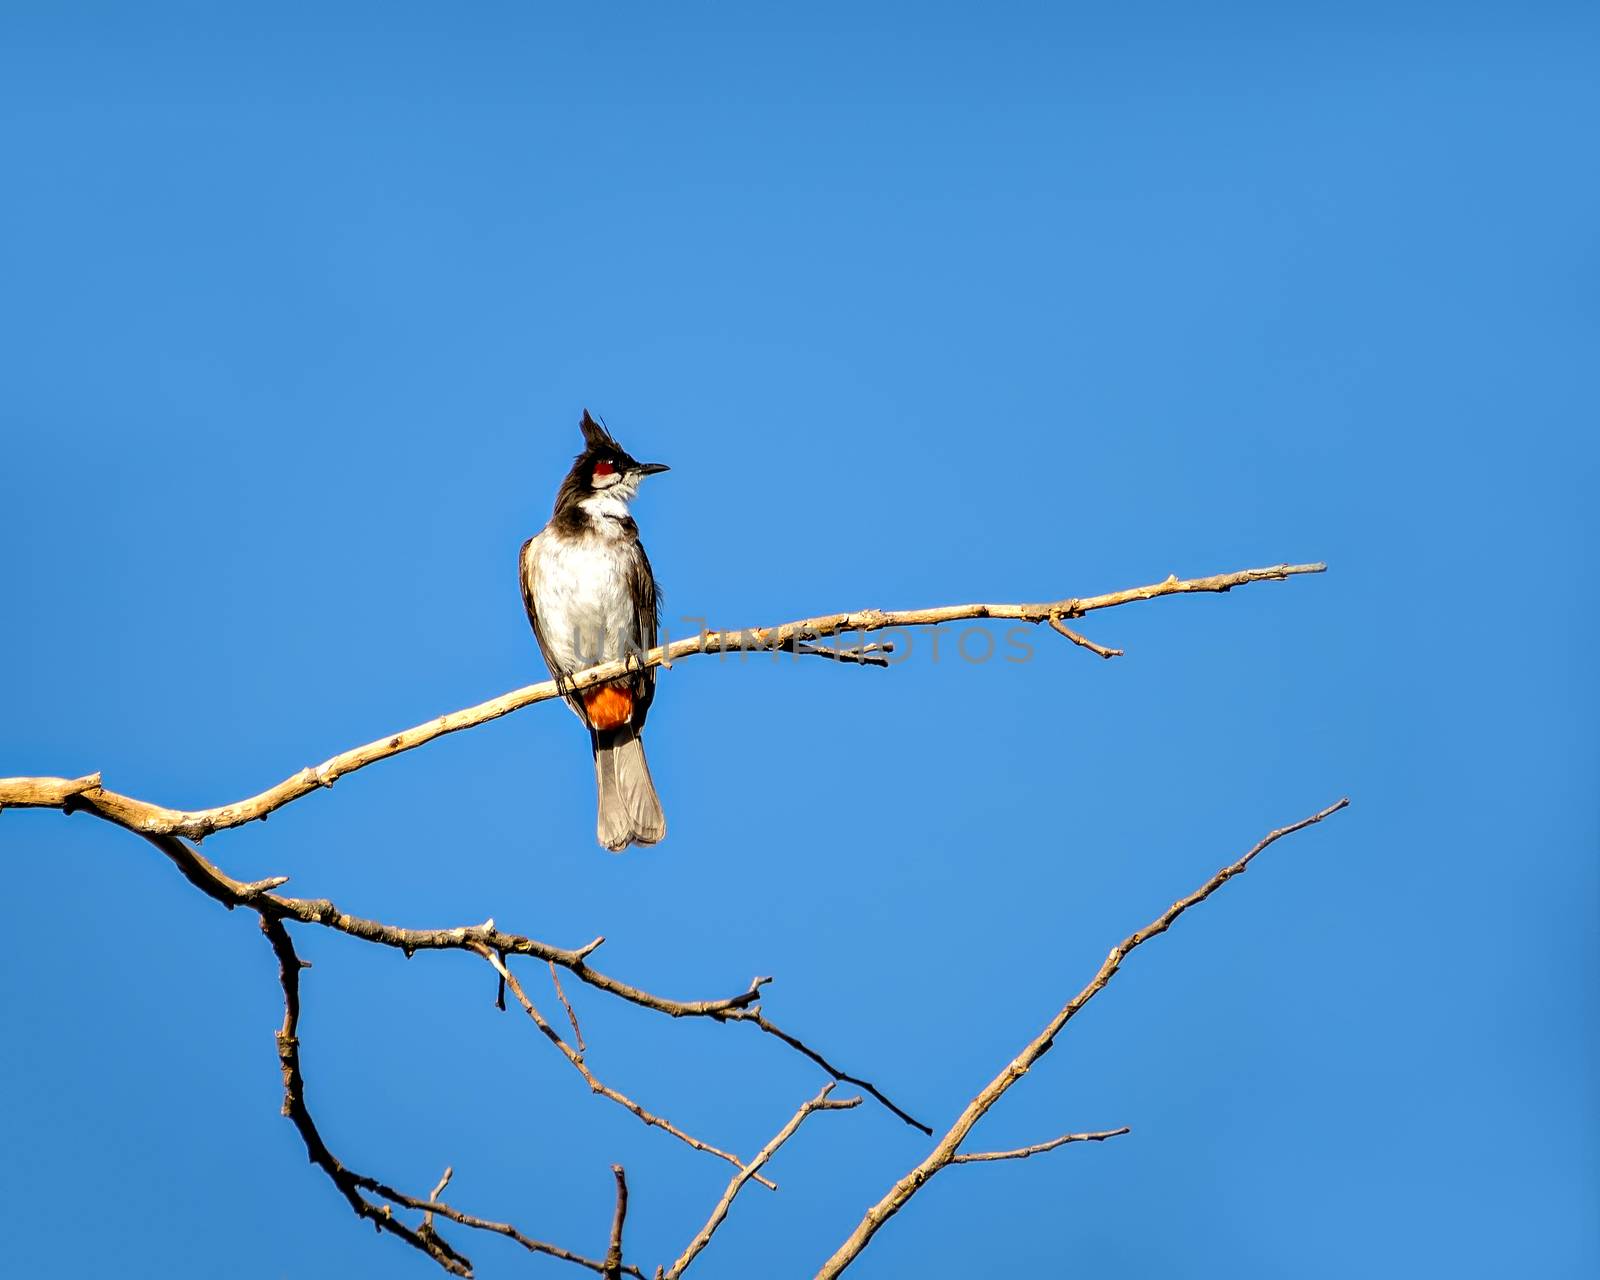 Red vented bulbul sitting on dry tree branch with clear blue sk by lalam